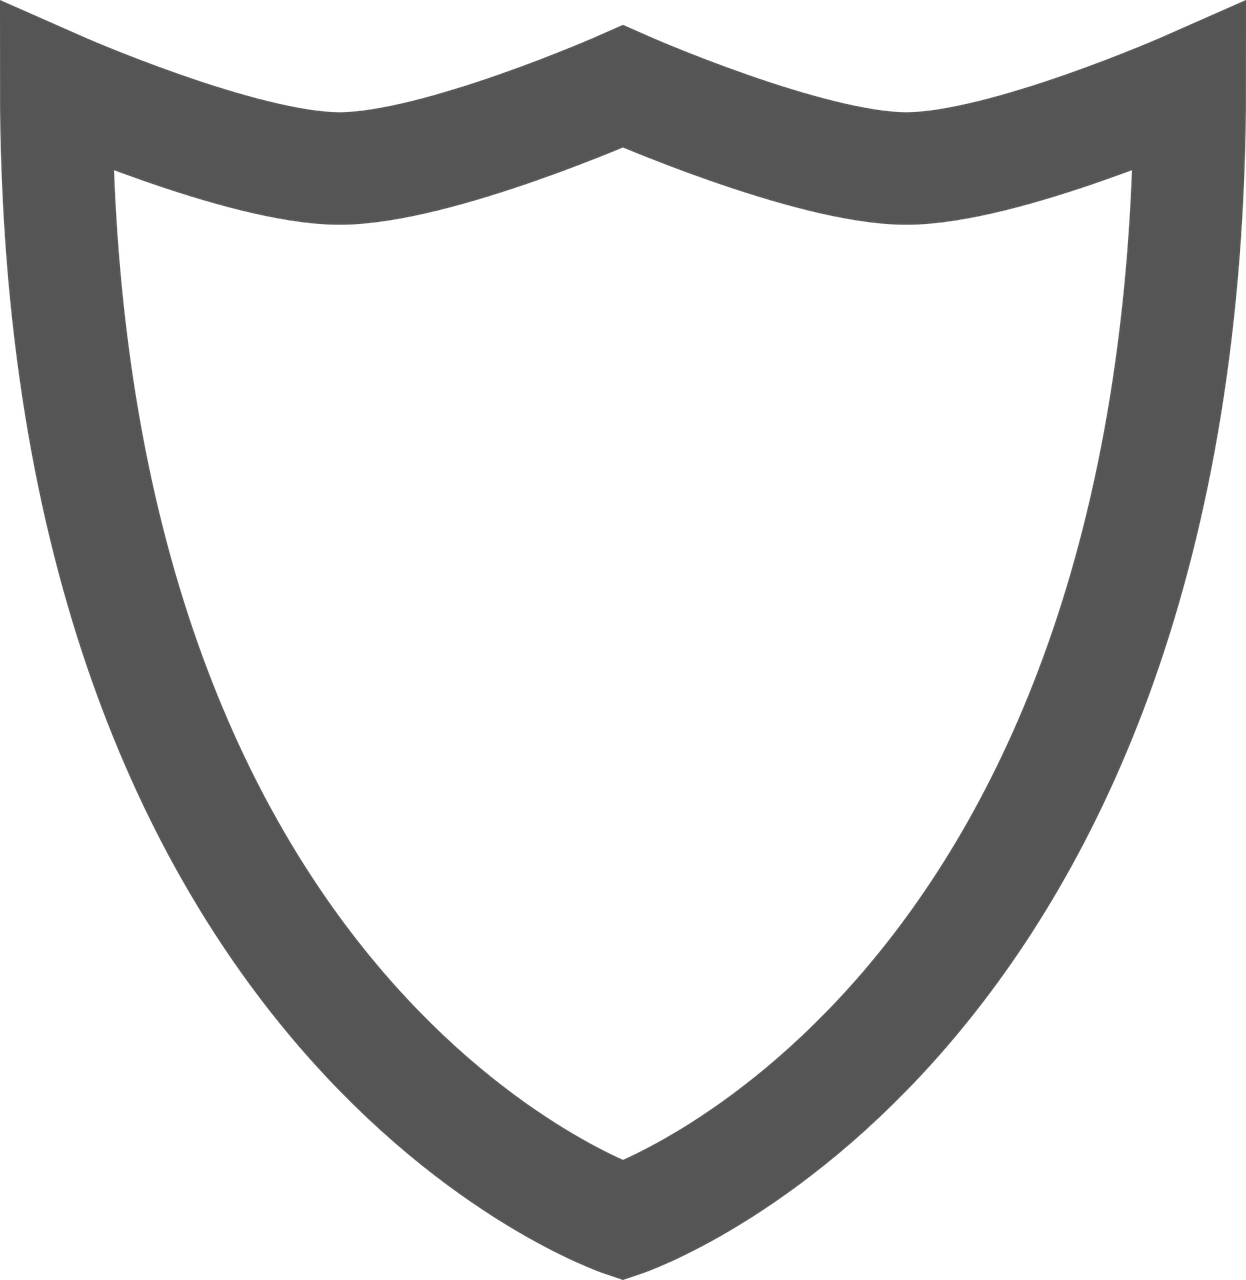 Security protection shield Royalty Free Vector Image